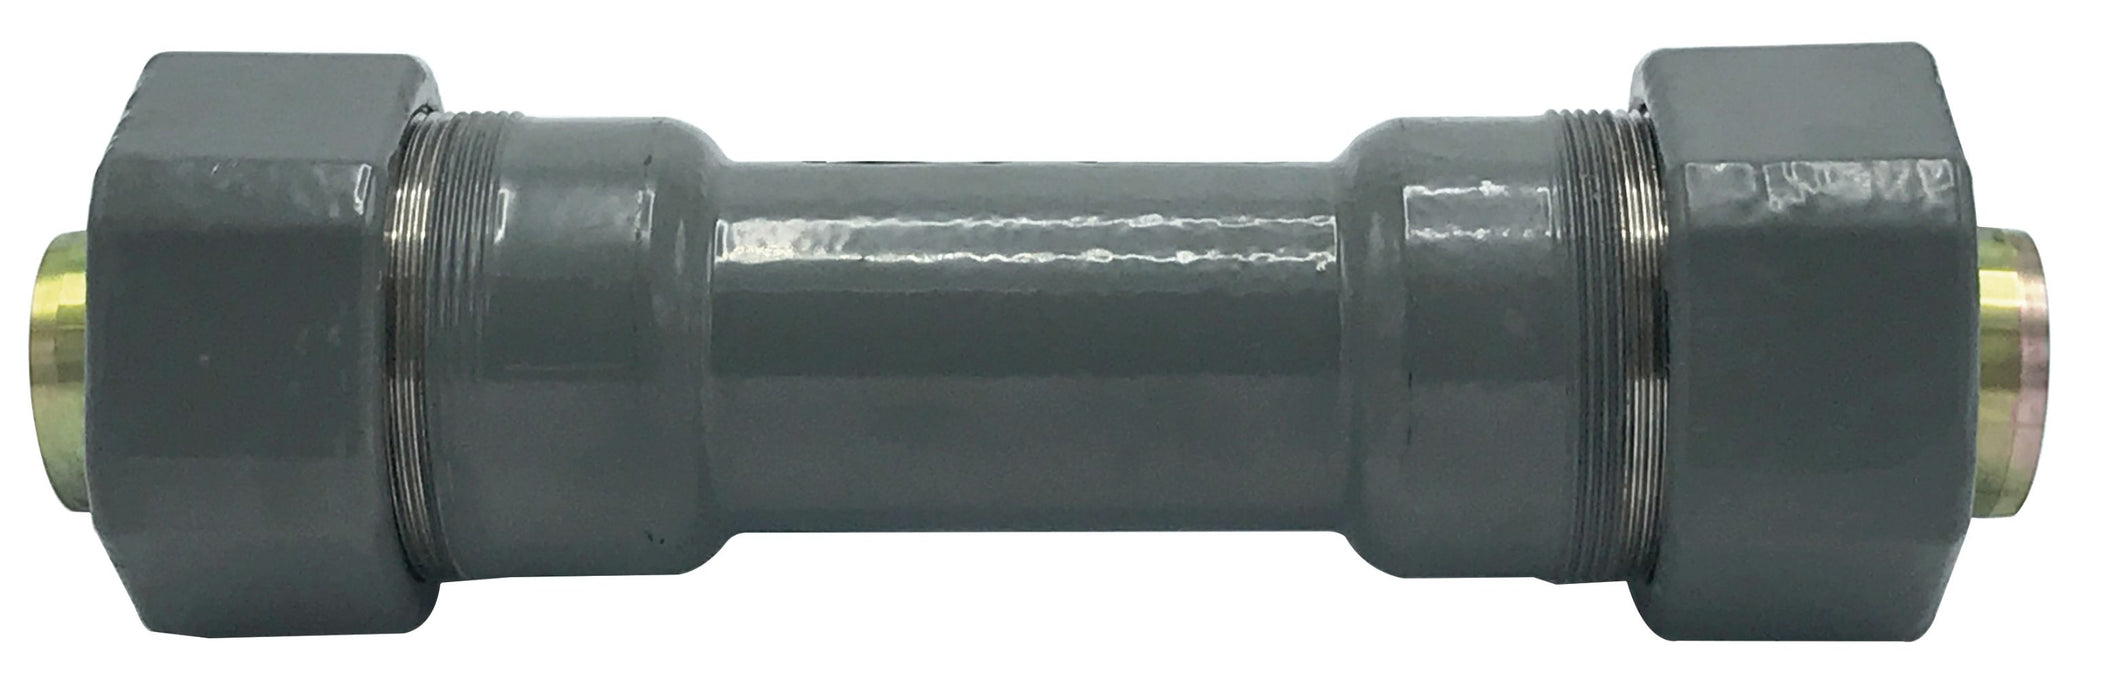 1 1/4" Steel Gas Compression Coupling SDR-10